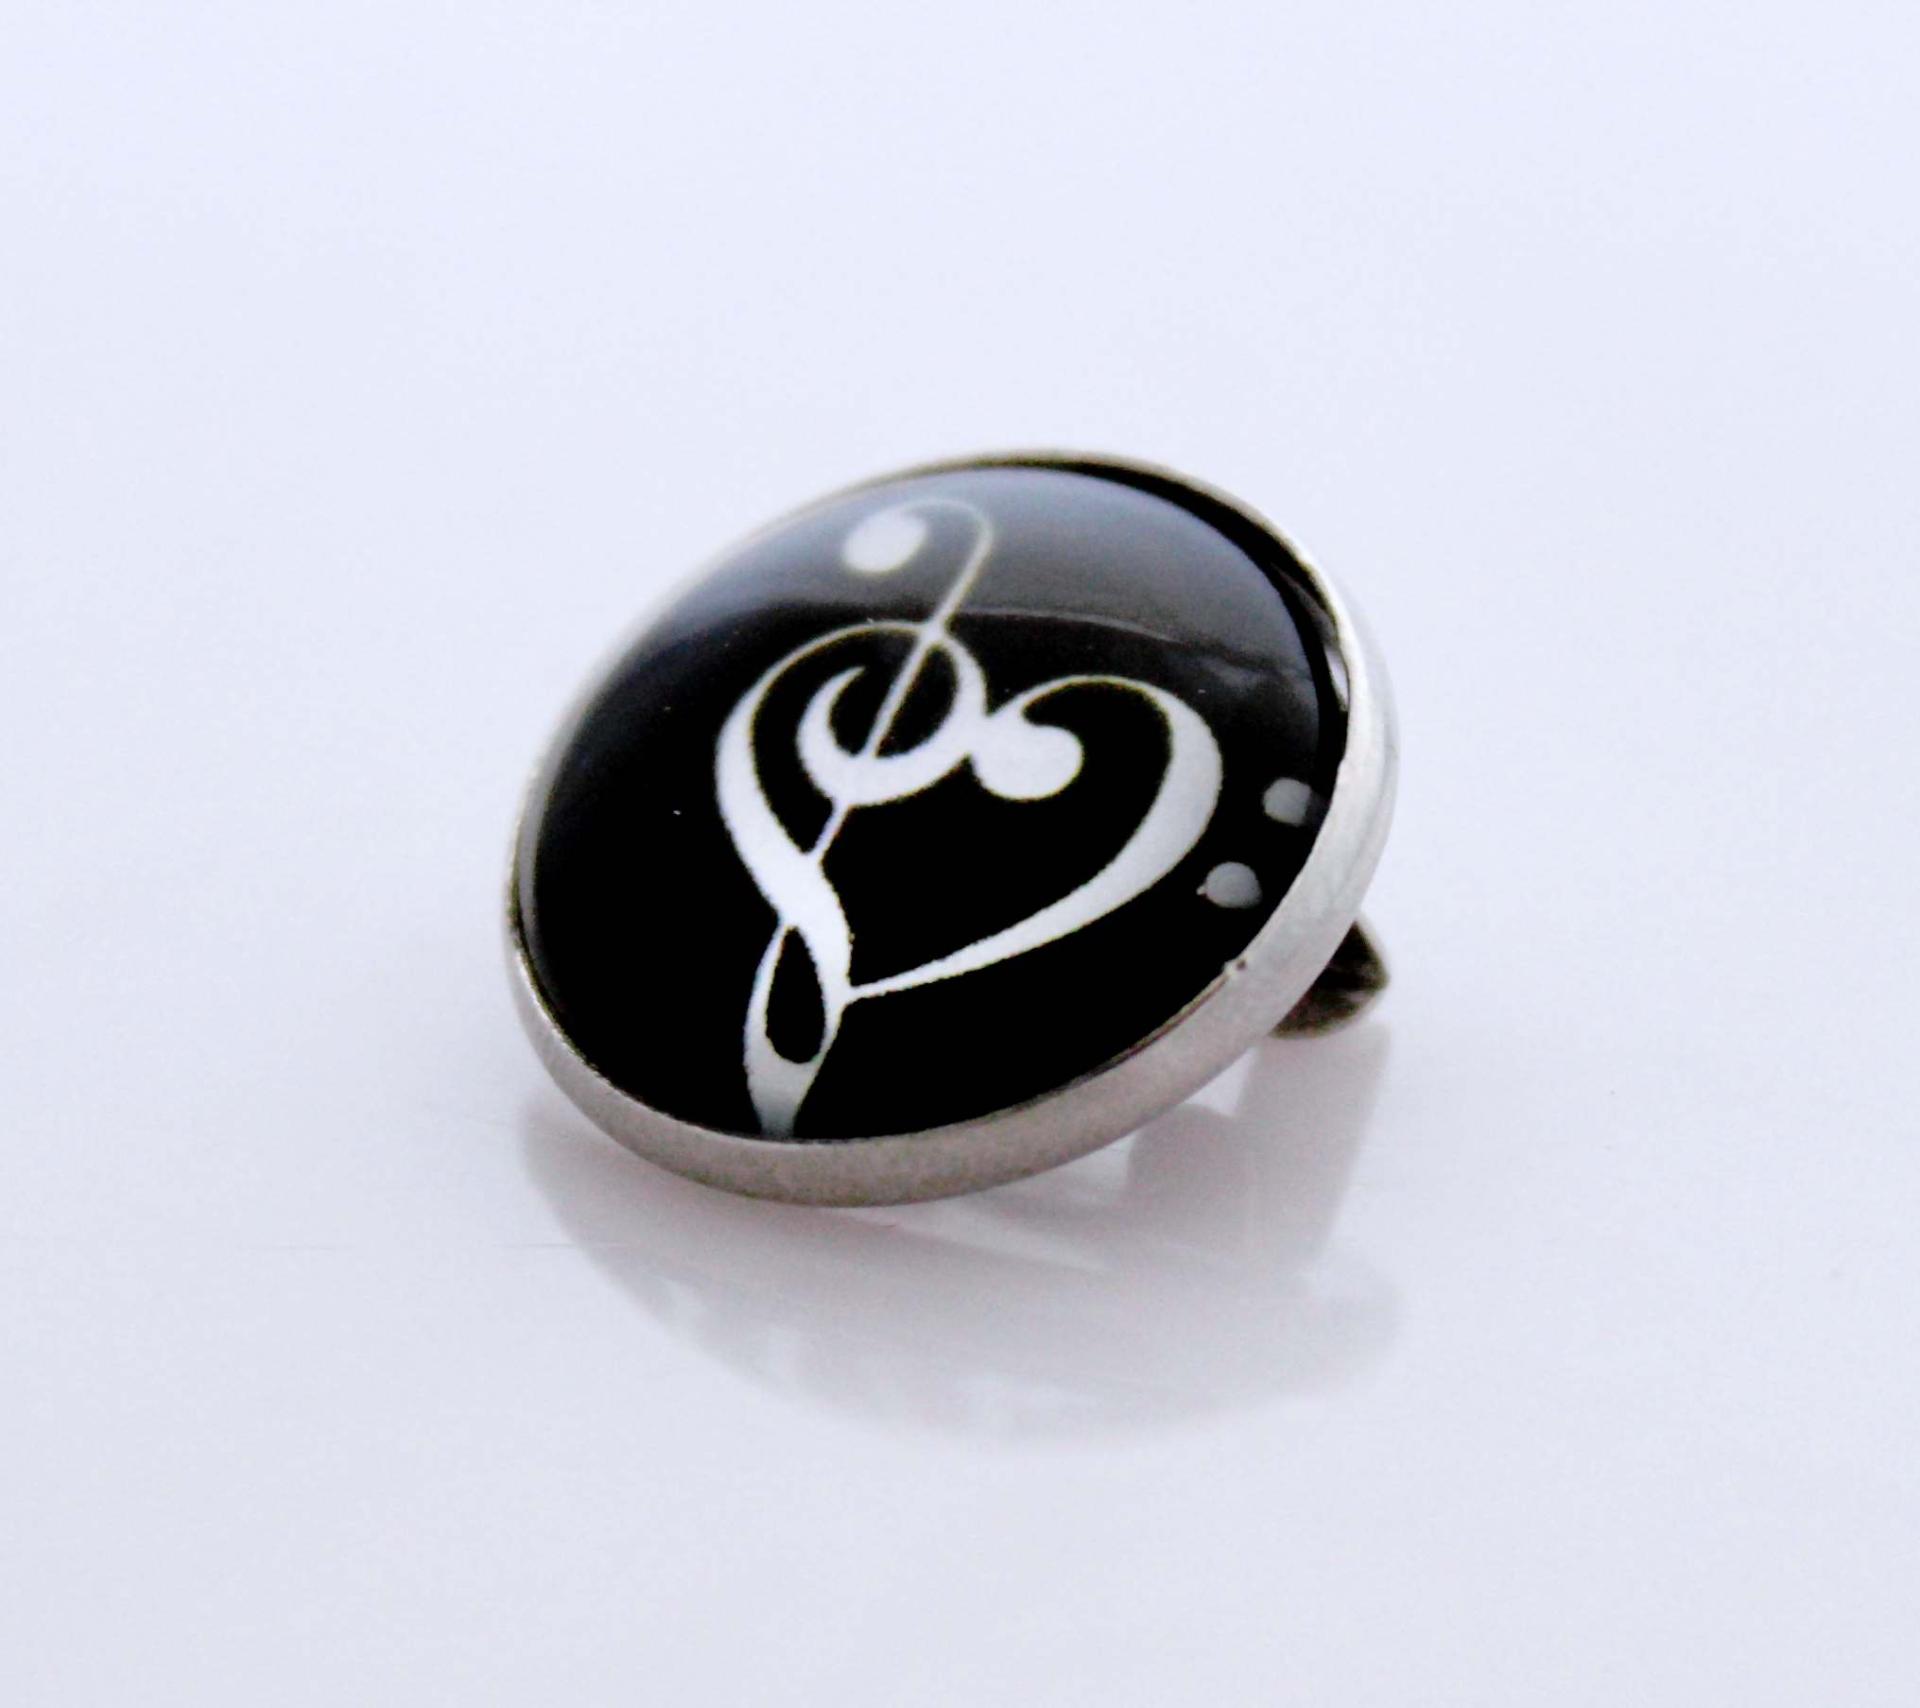 Music Note Treble Clef & Bass Clef Glass Cabouchon Badge